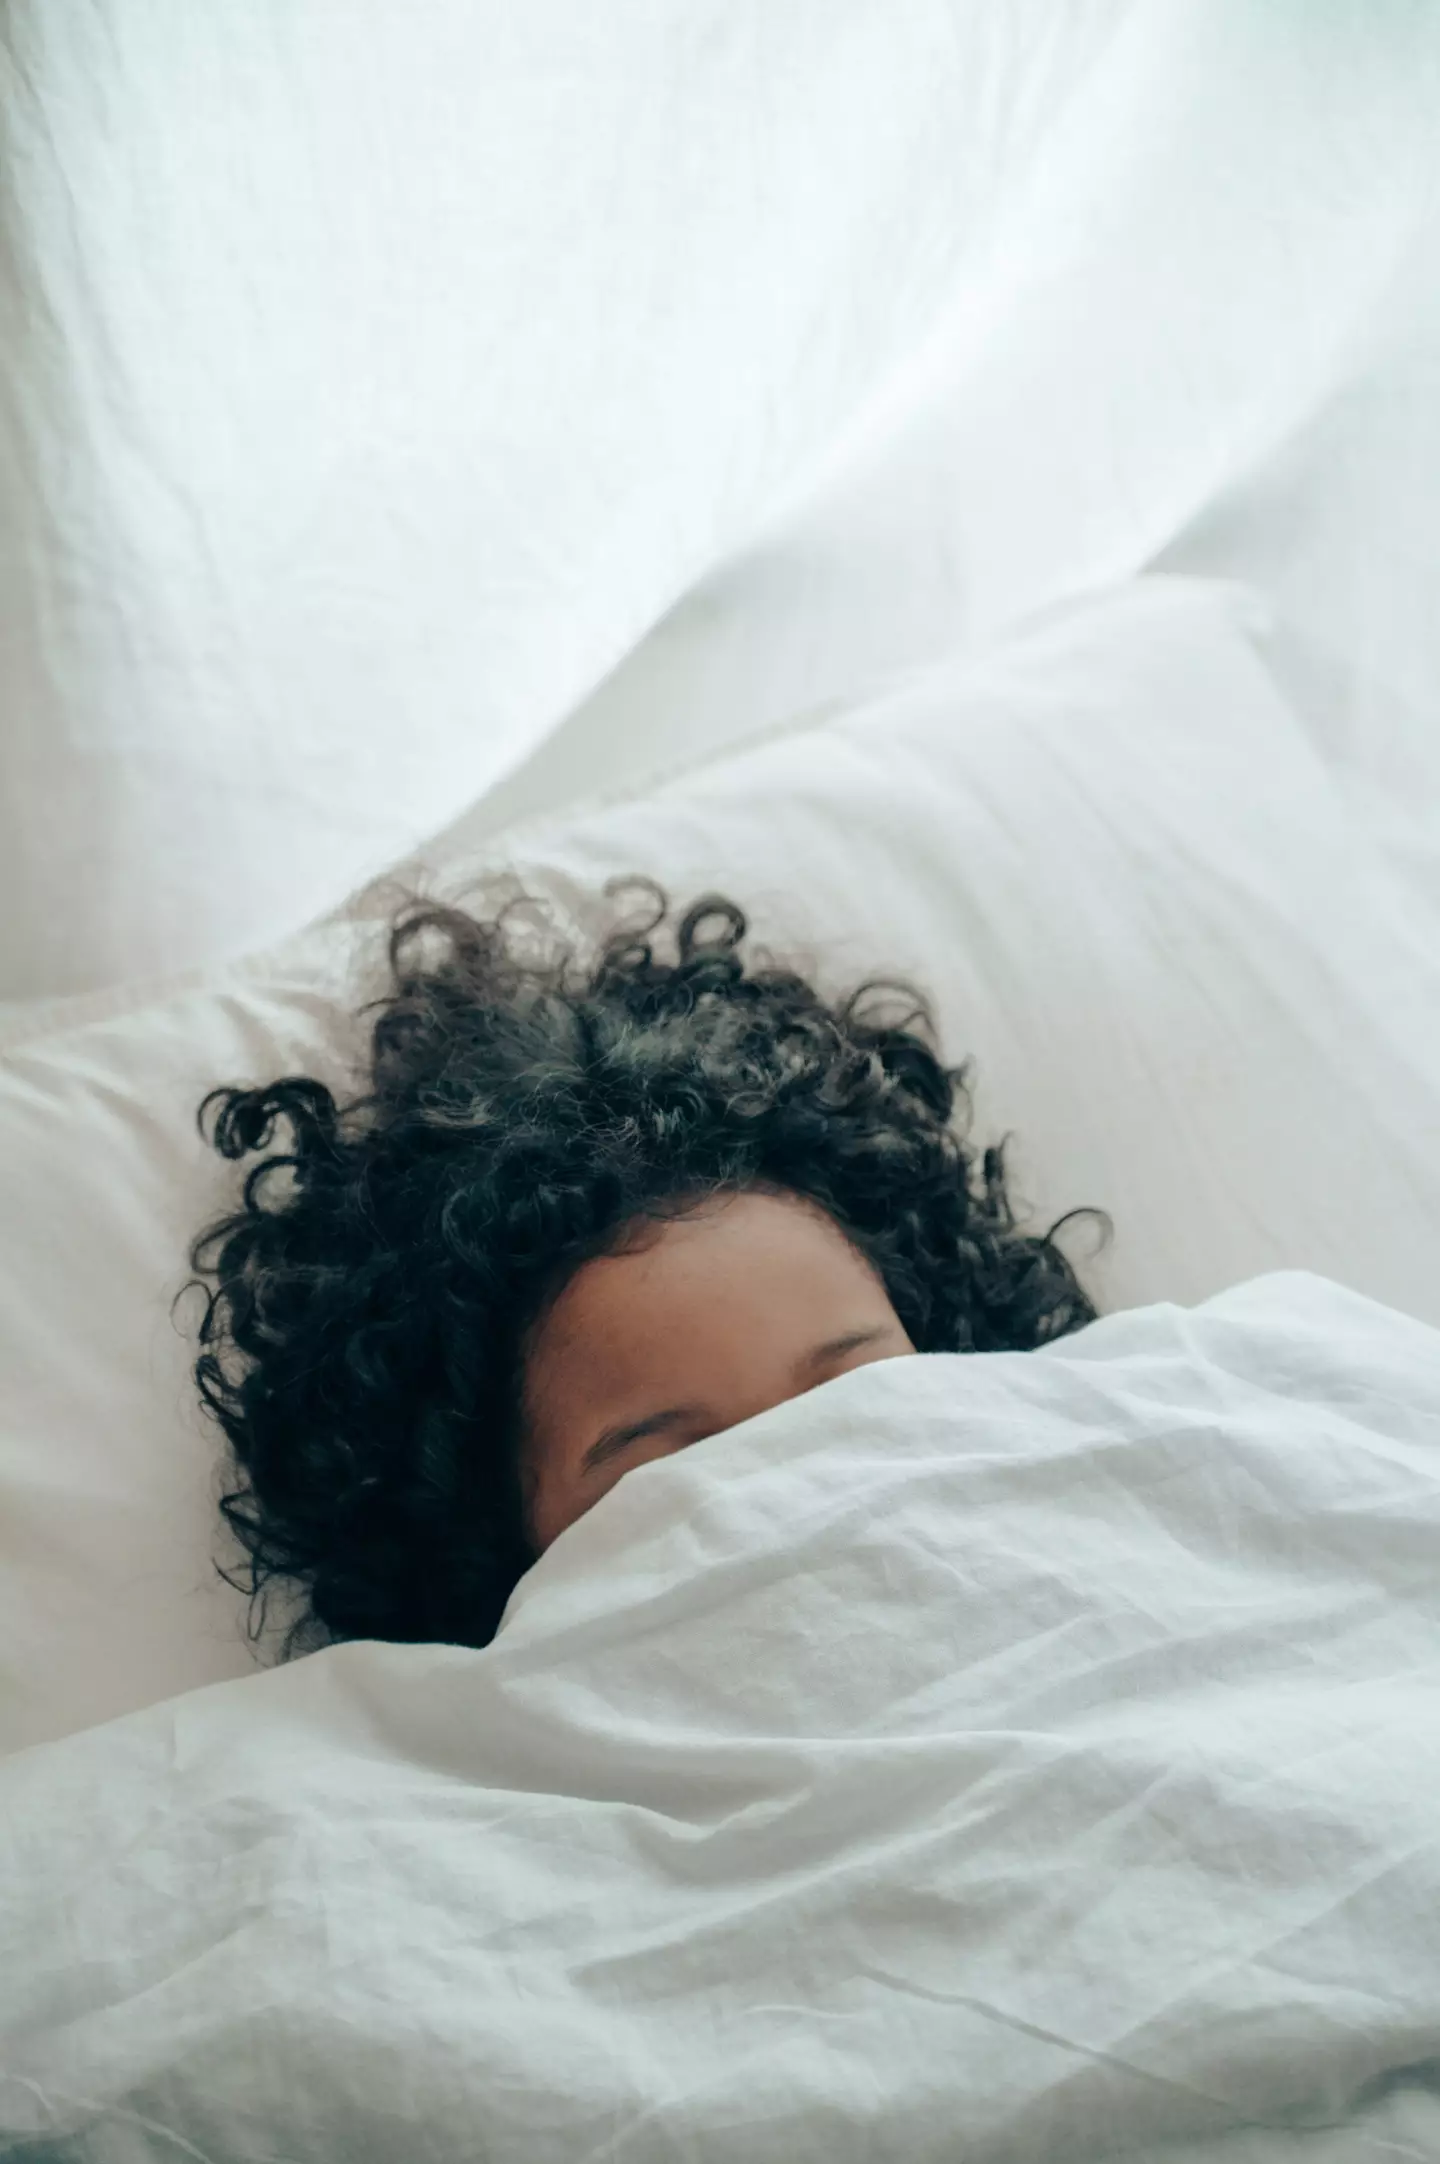 How you sleep could be an indicator of whether you have Neanderthal DNA.